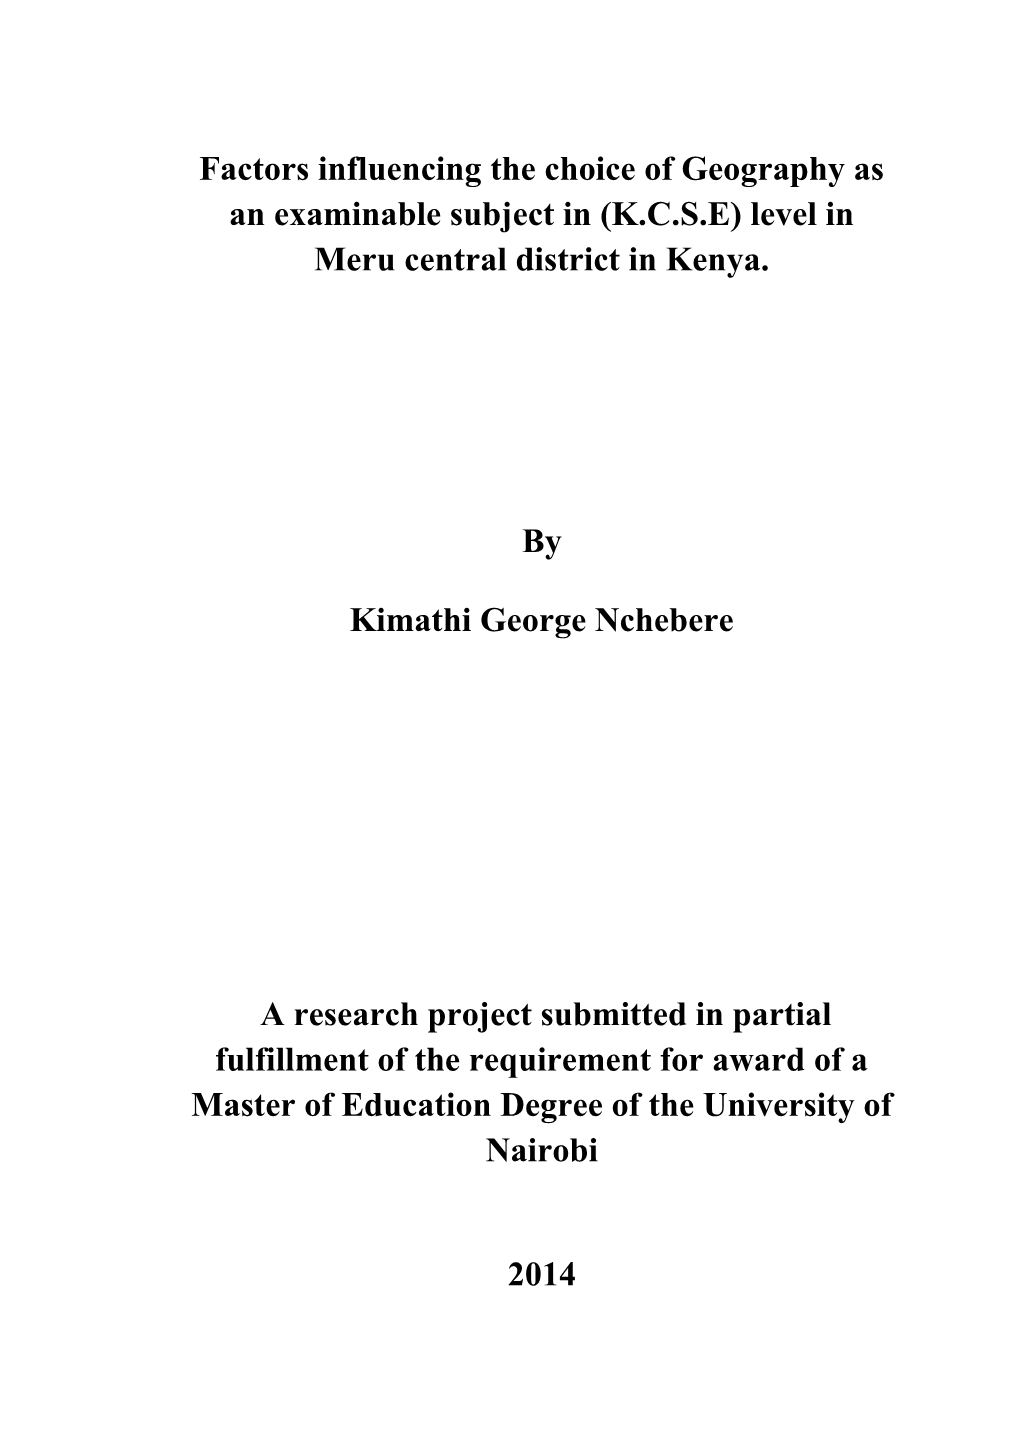 Factors Influencing the Choice of Geography As an Examinable Subject in (K.C.S.E) Level